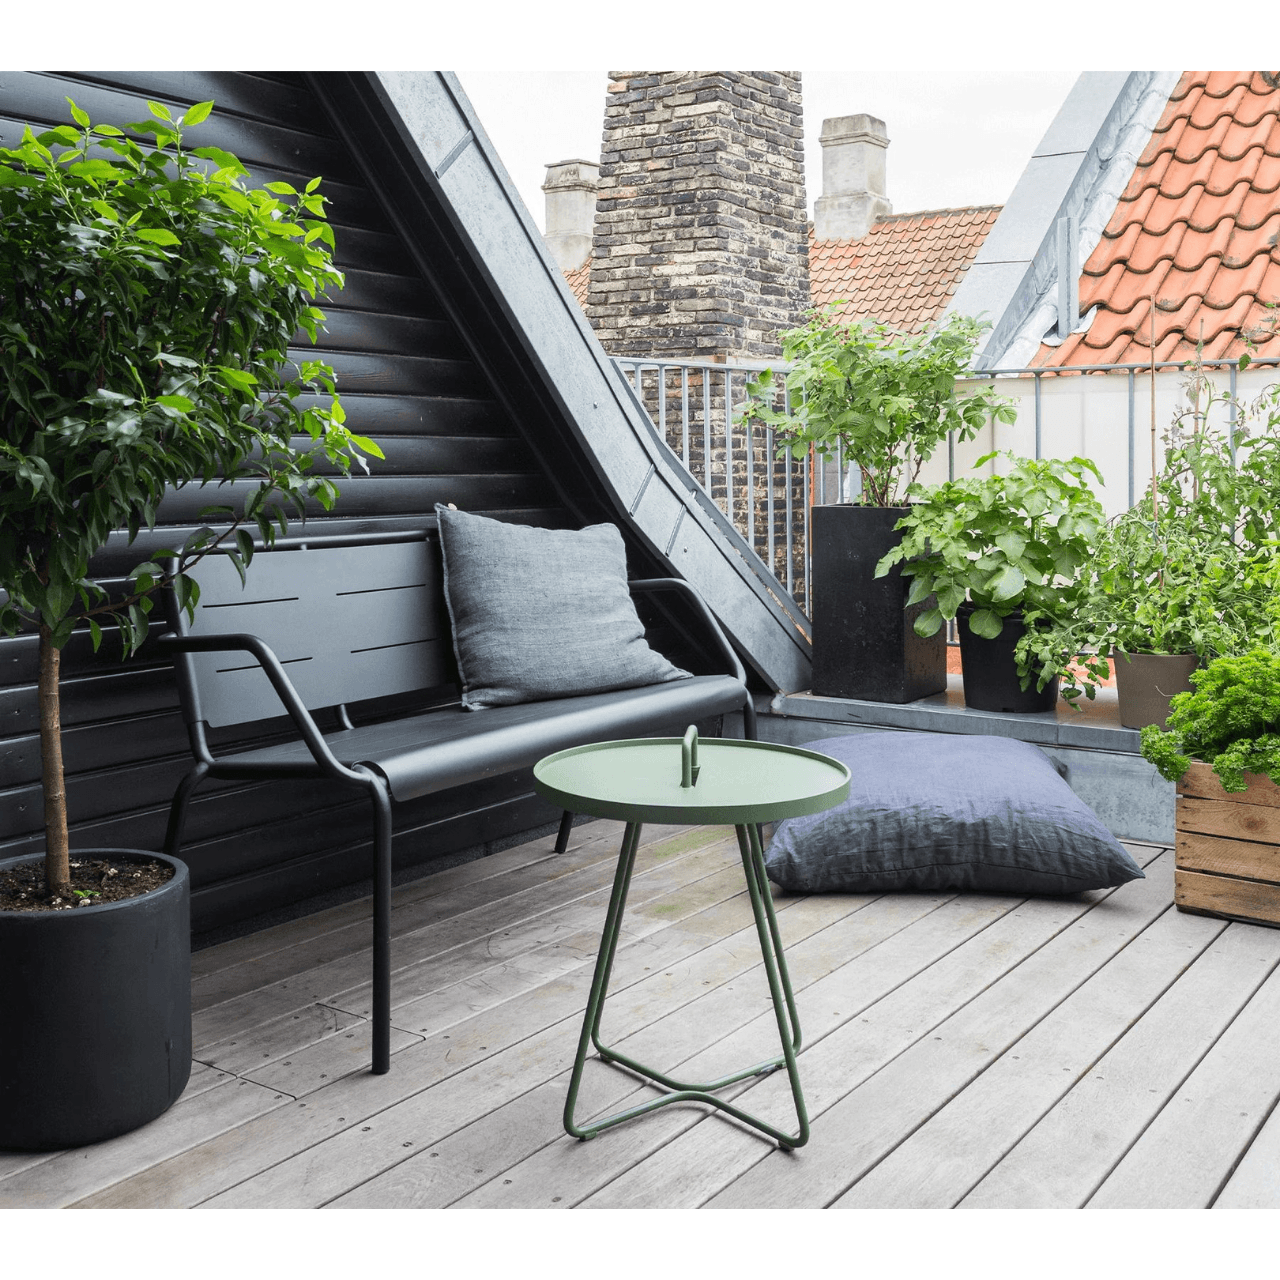 Boxhill's On-The-Move olive green outdoor round side table along with plants and 2-seater black aluminum chair place on balcony